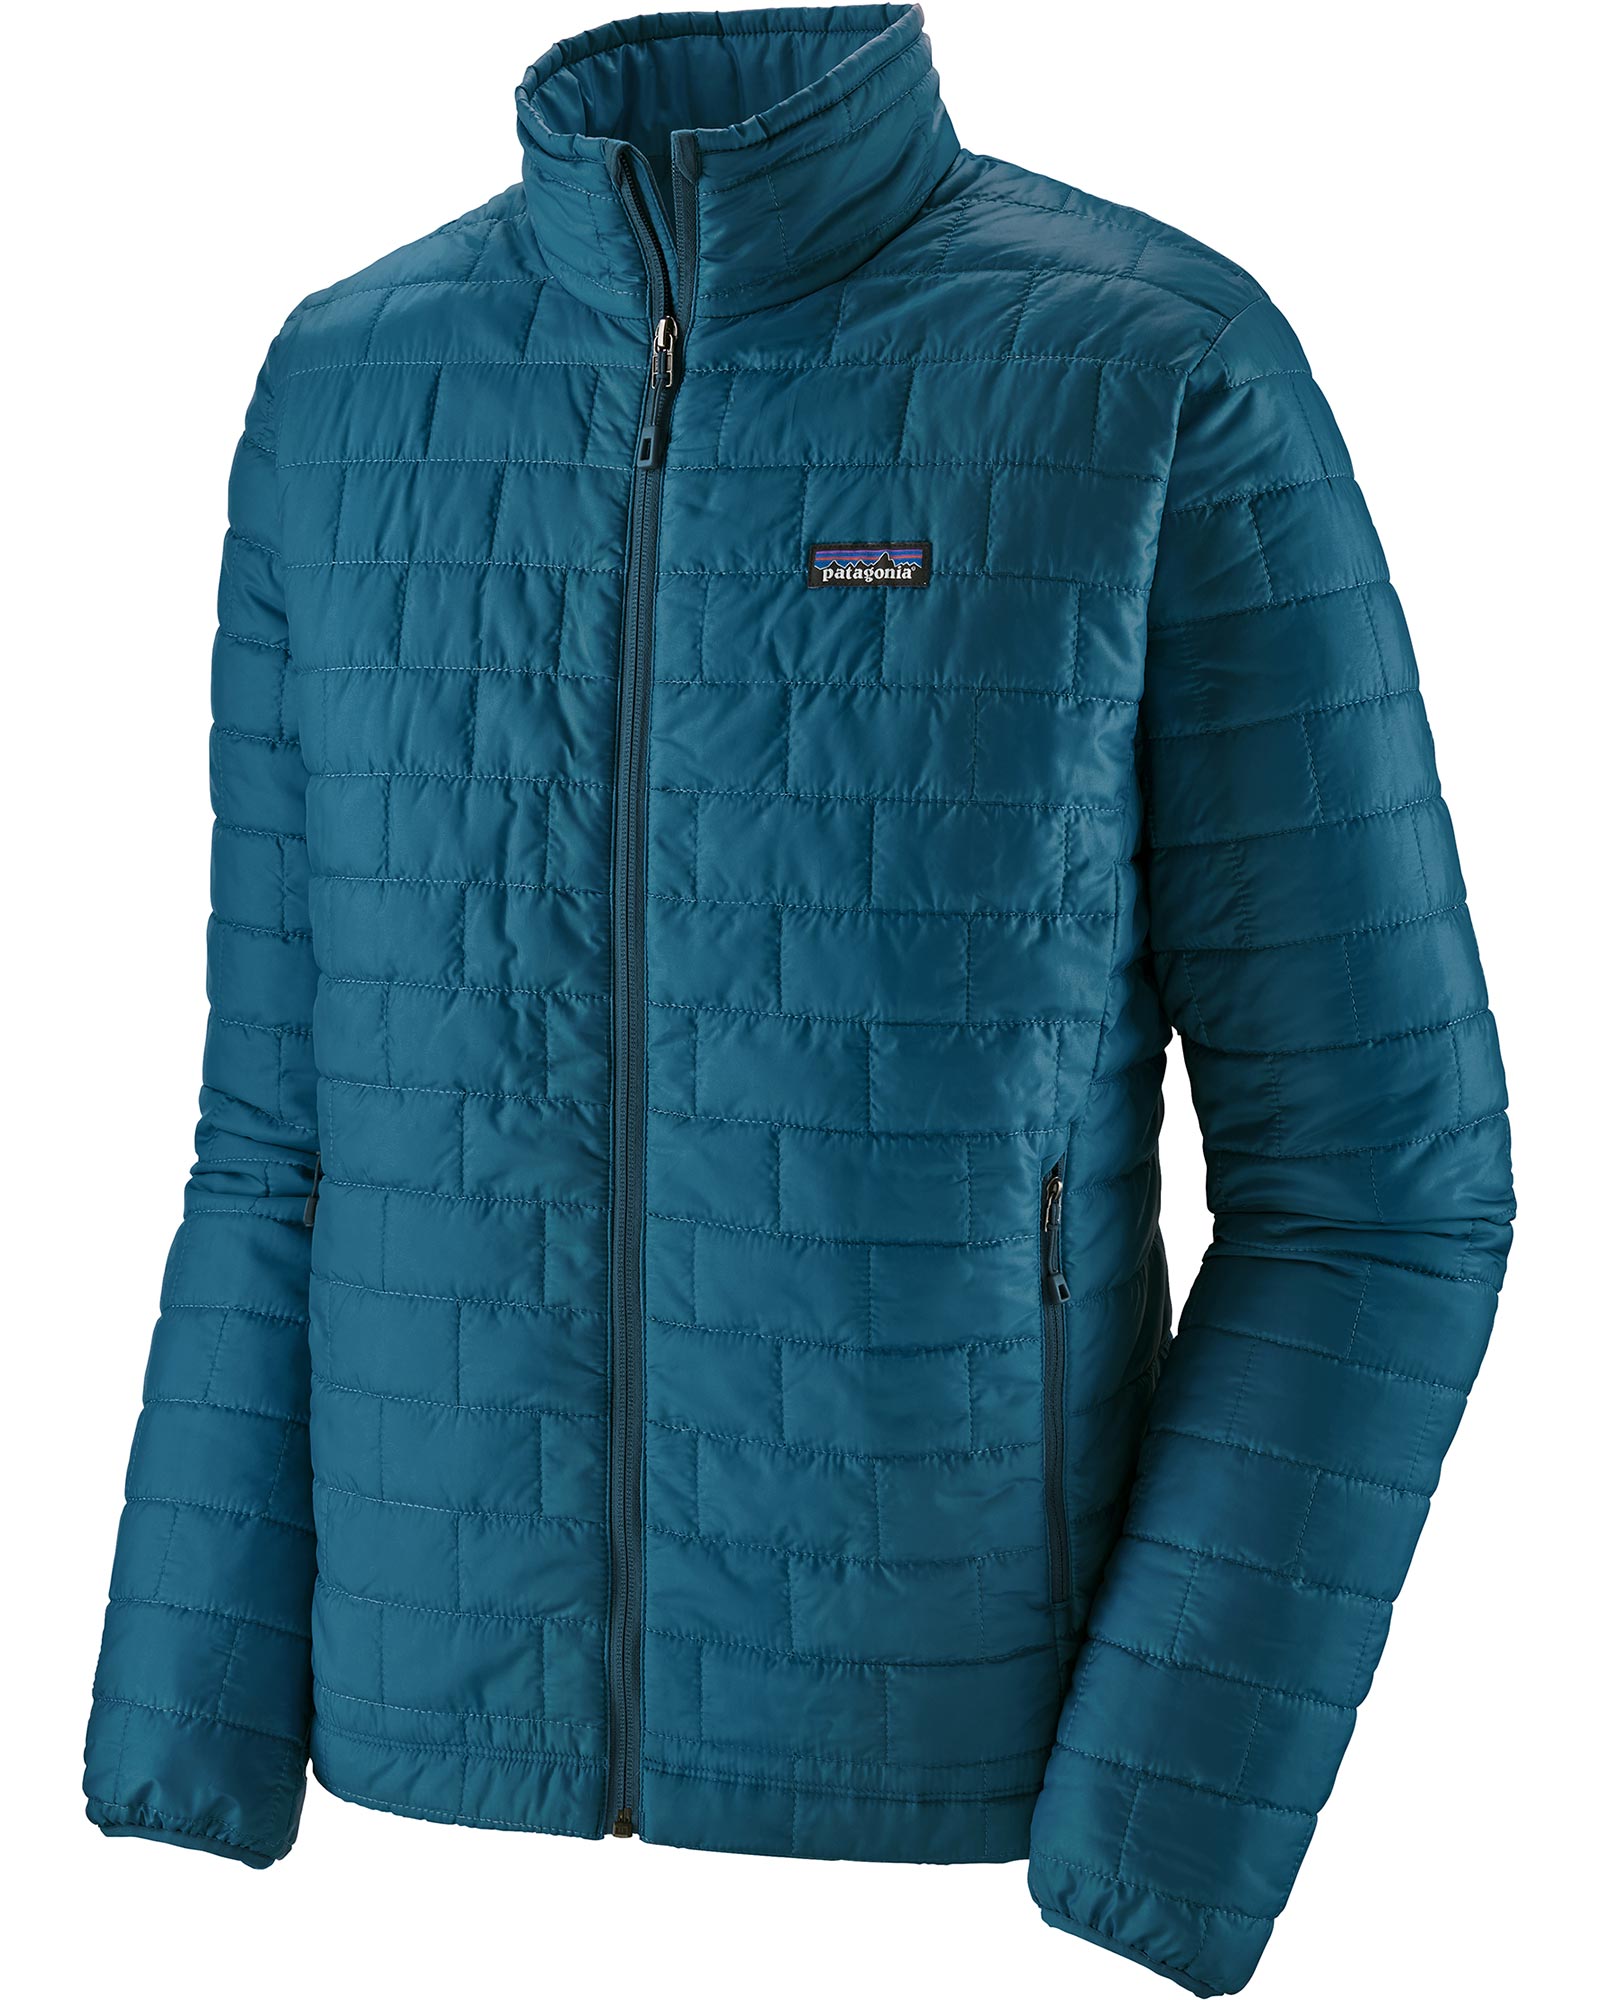 Patagonia Nano Puff Men’s Insulated Jacket - Crater Blue S